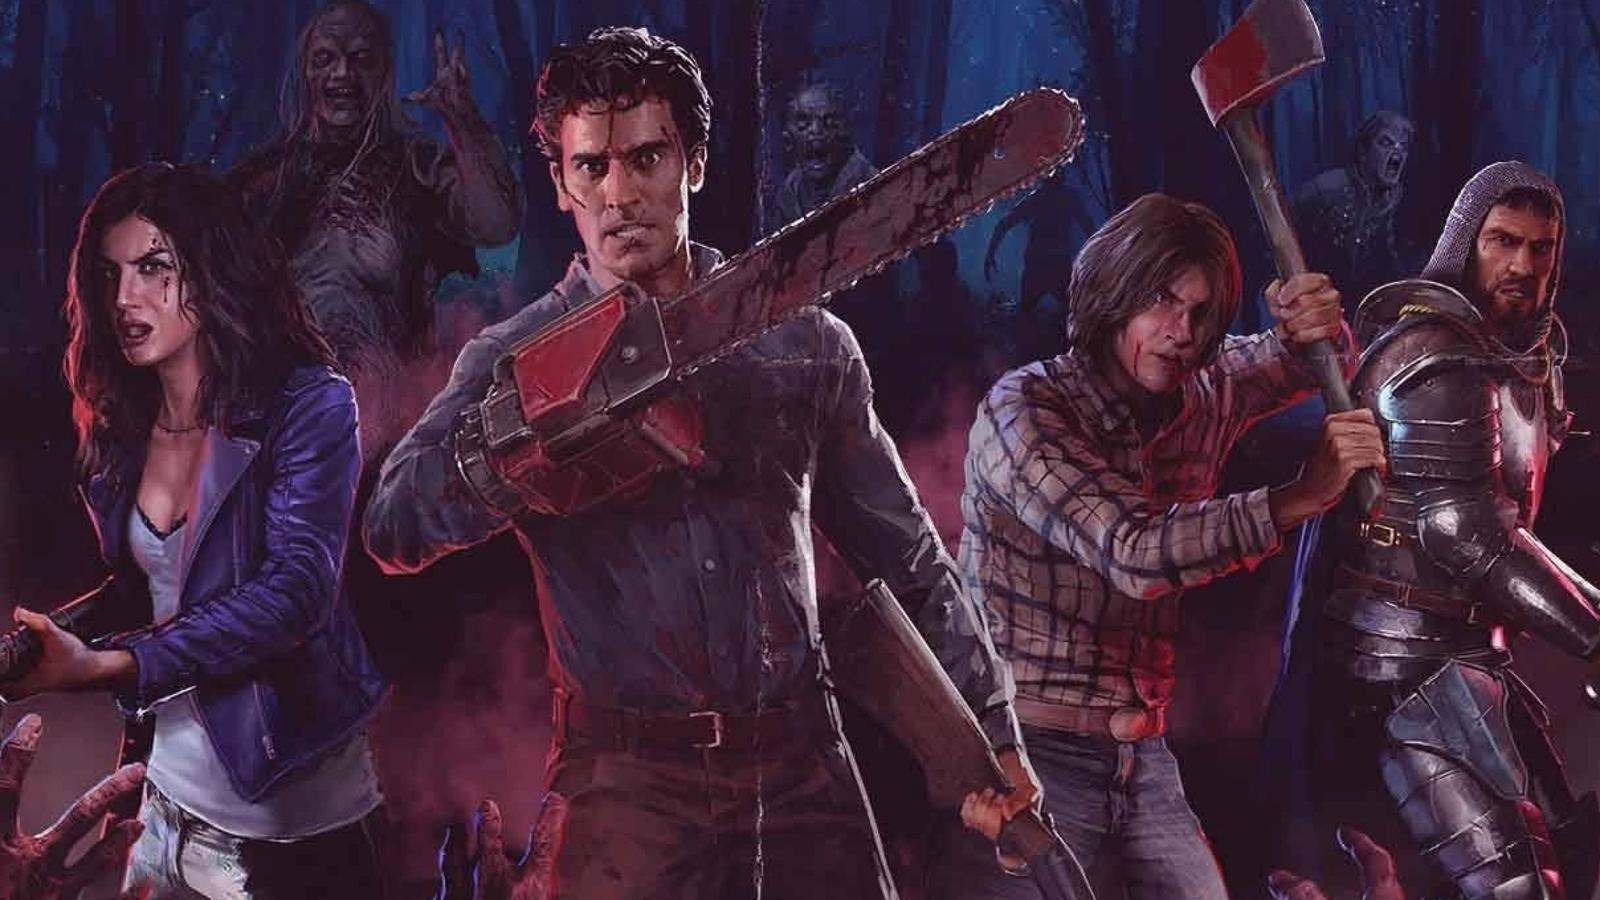 Evil Dead: The Game – Game of the Year Edition